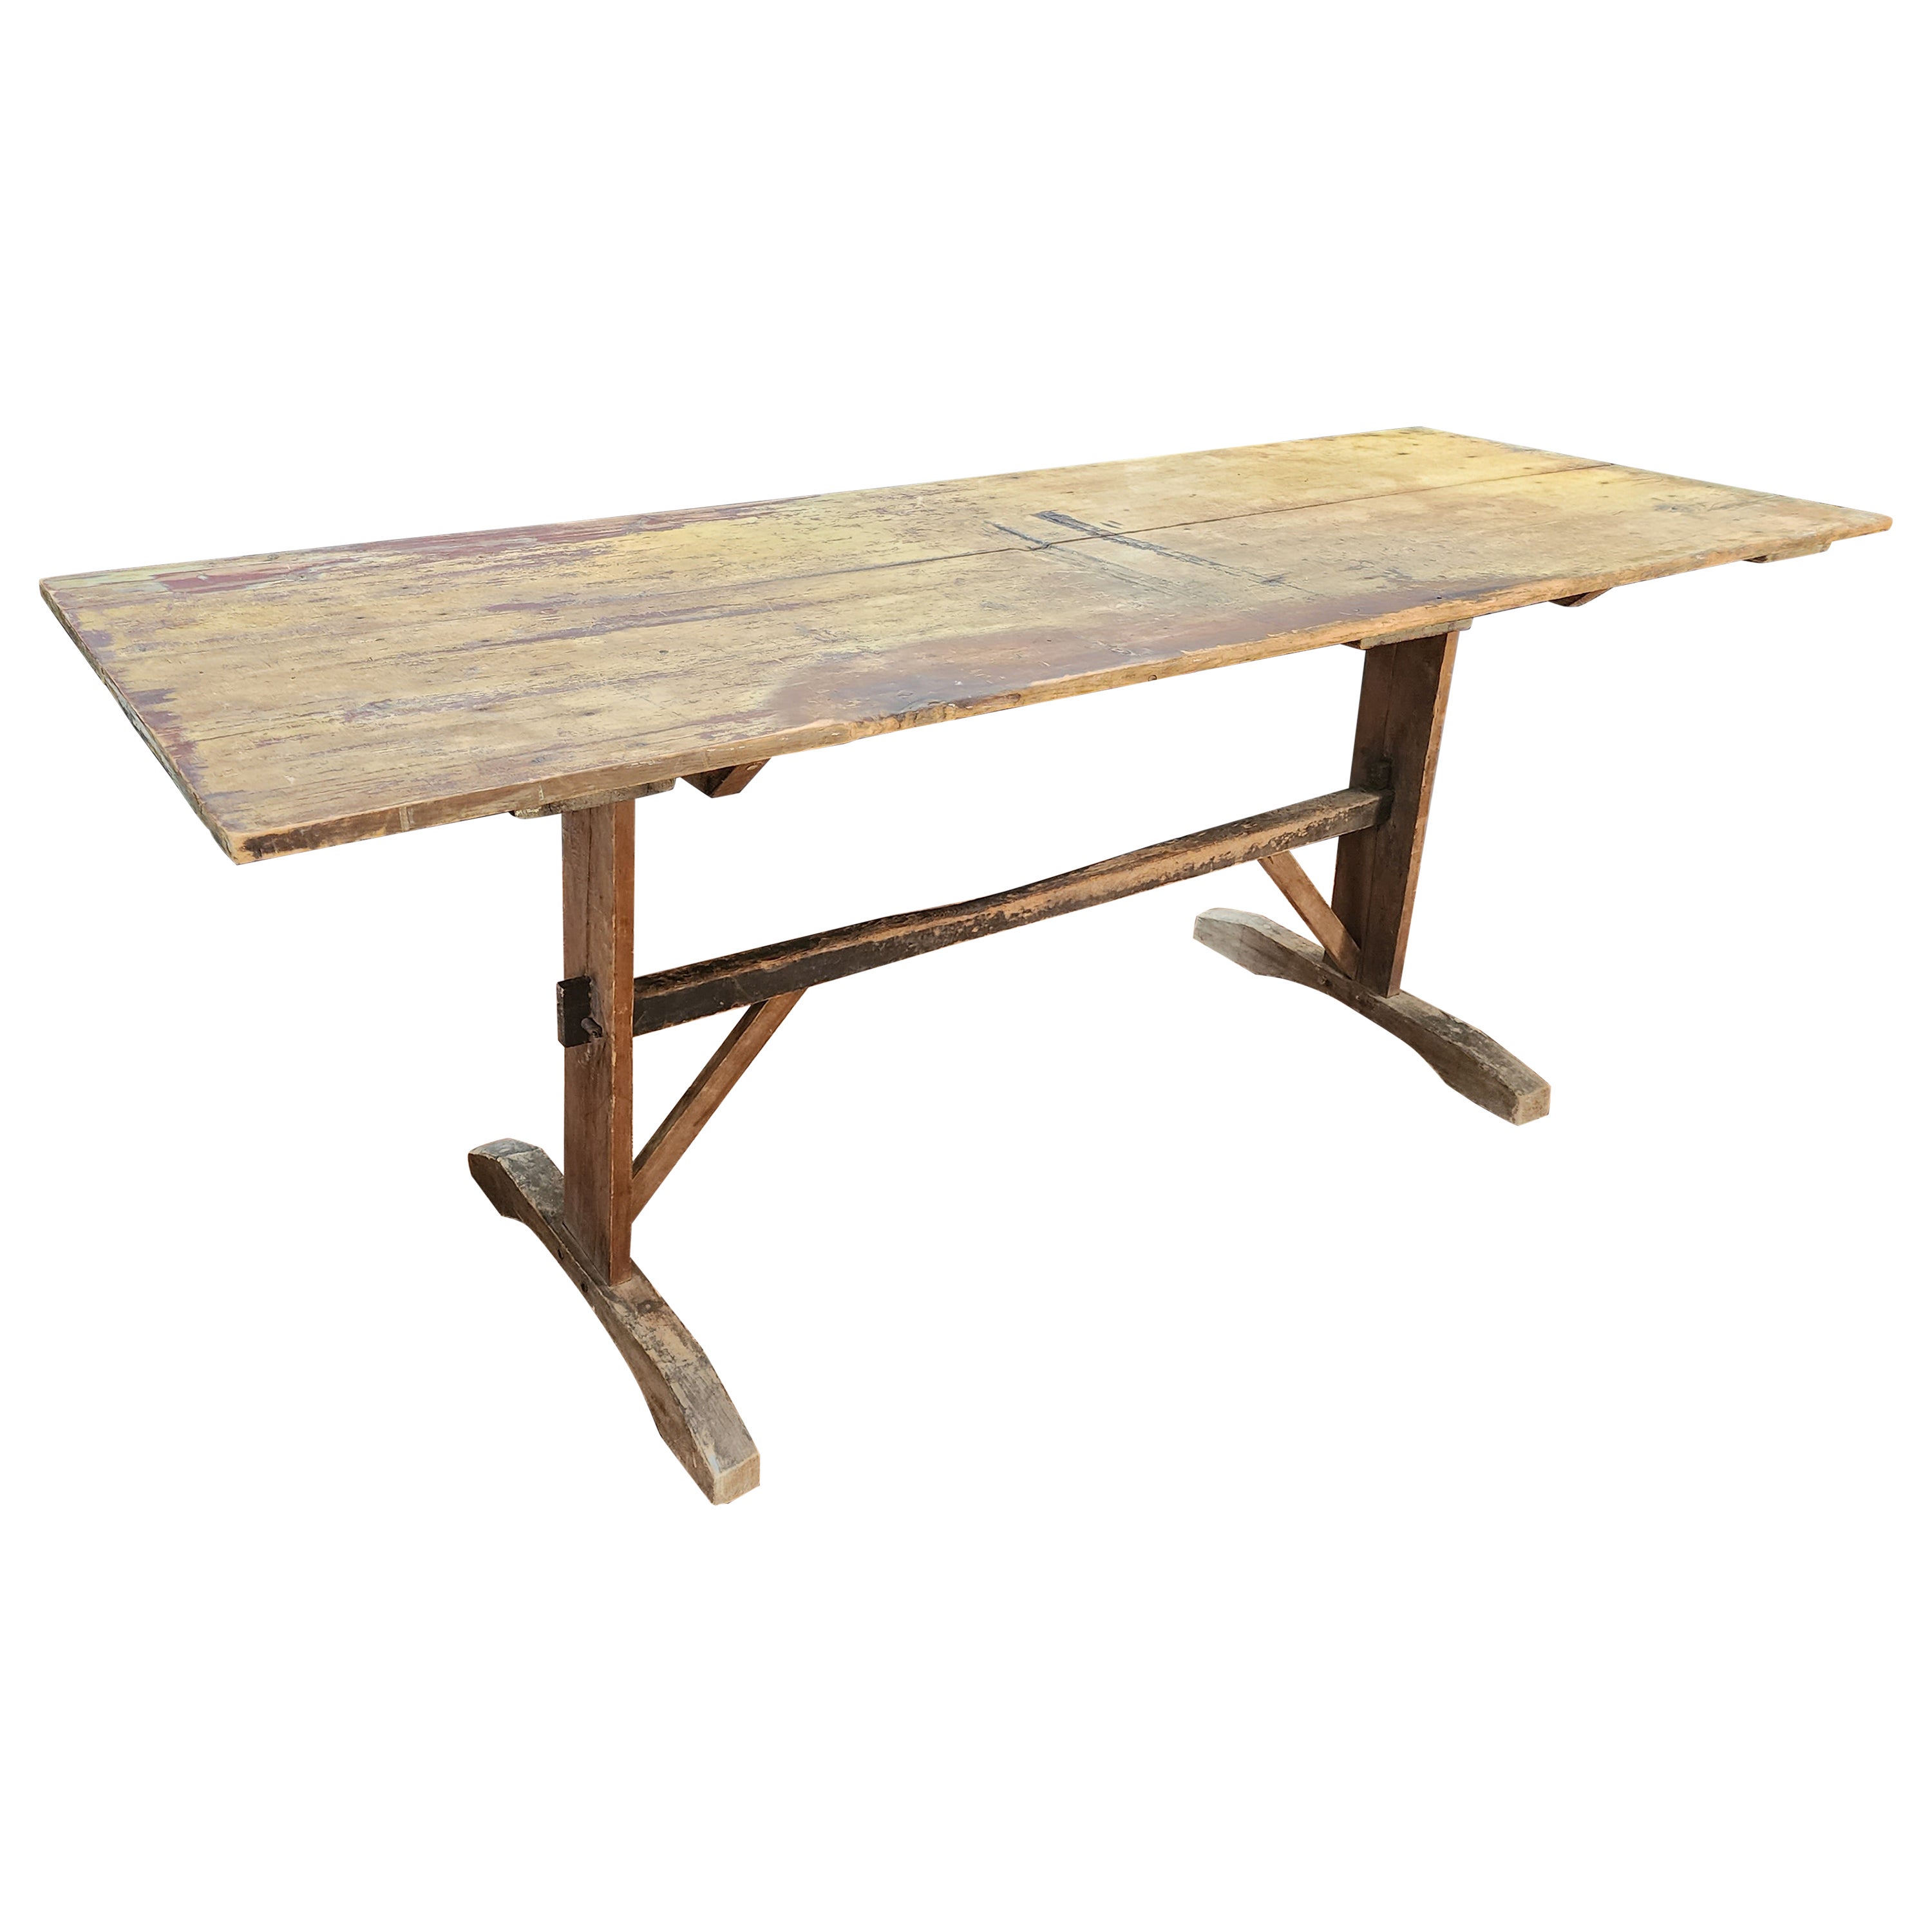 A very handsome and minimal 18th century American trestle table. 
Perfect for a work table, desk, hall table, console or would also make a great library table to pile your books on.
Made completely from pine, the two board top especially old growth.